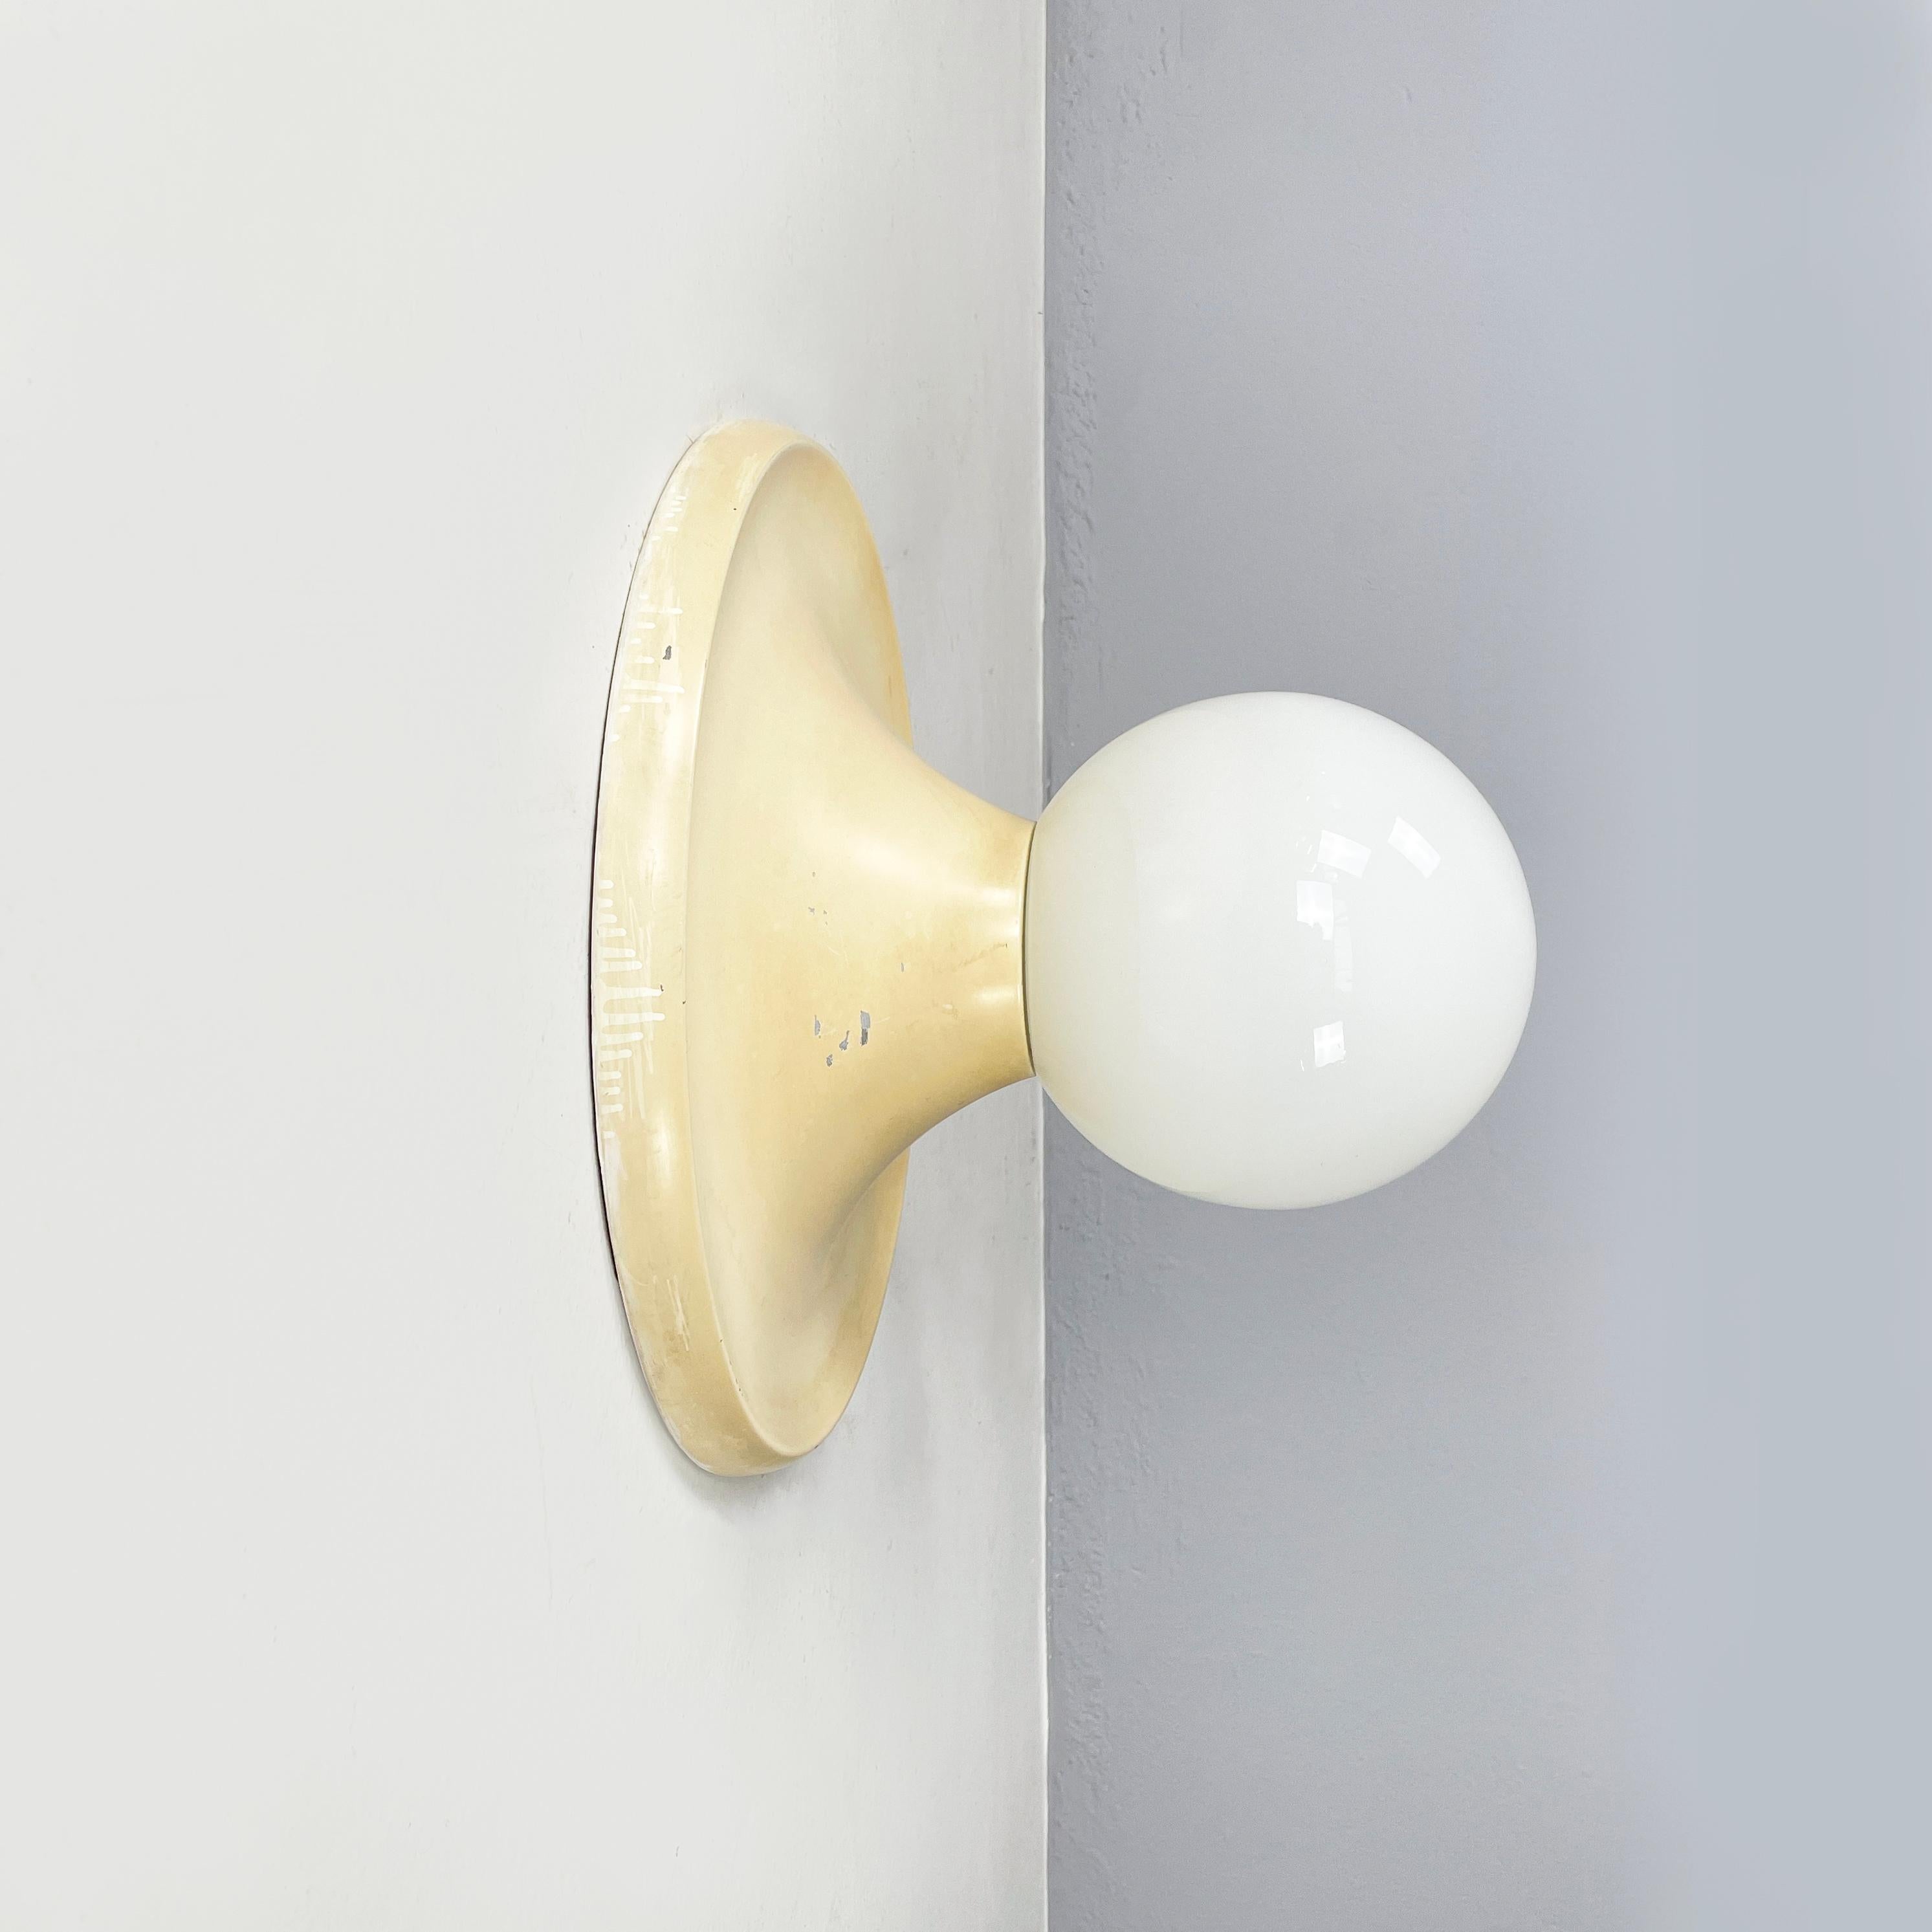 Italian mid-century modern Wall light Light Ball by Castiglioni brothers for Flos 1960s
Elegant Wall or ceiling lamp mod. Light Ball with spherical opaline glass diffuser. The round base structure is in white ivory enamelled metal.
Produced by Flos